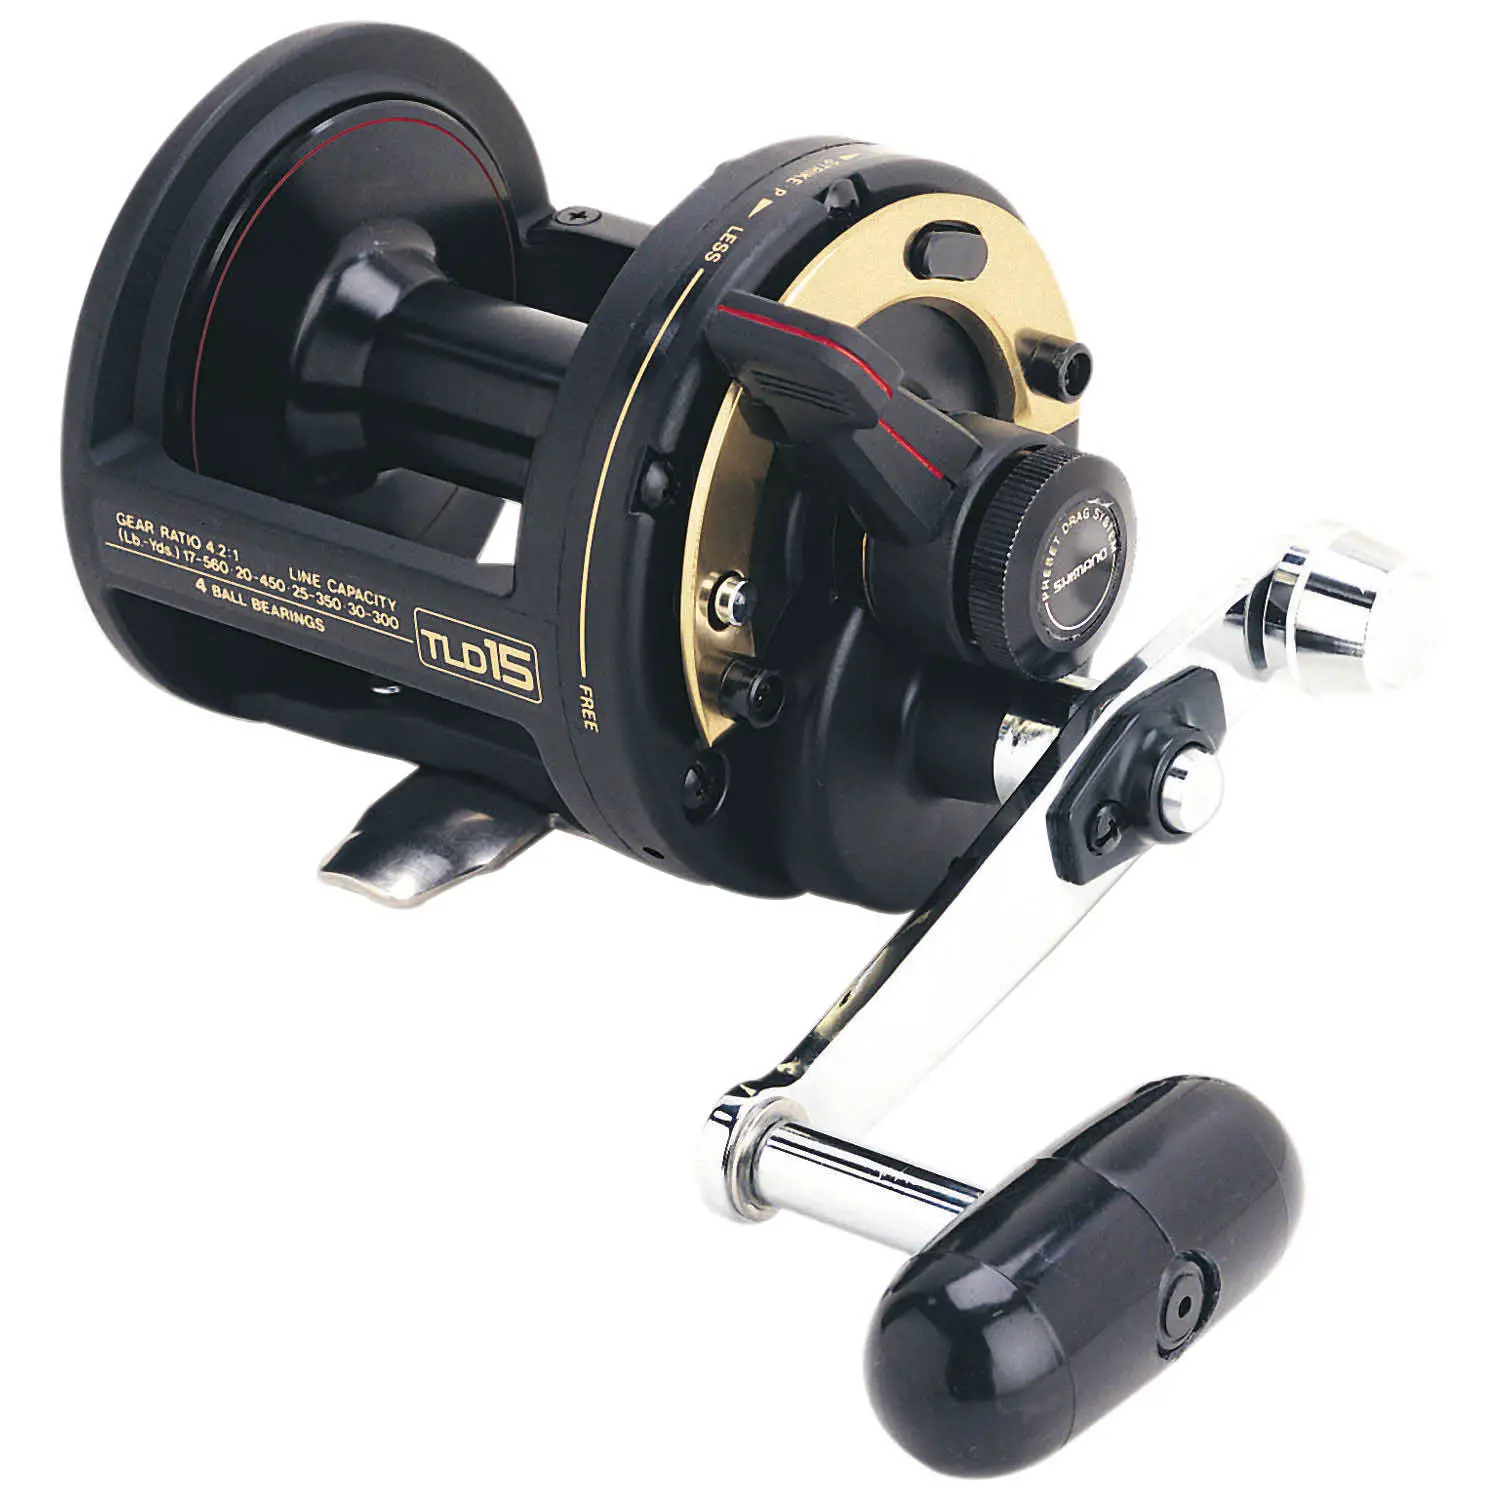 Pre-Load Body Details about   SHIMANO CONVENTIONAL REEL PART 1 TLD0097 TLD20 - 